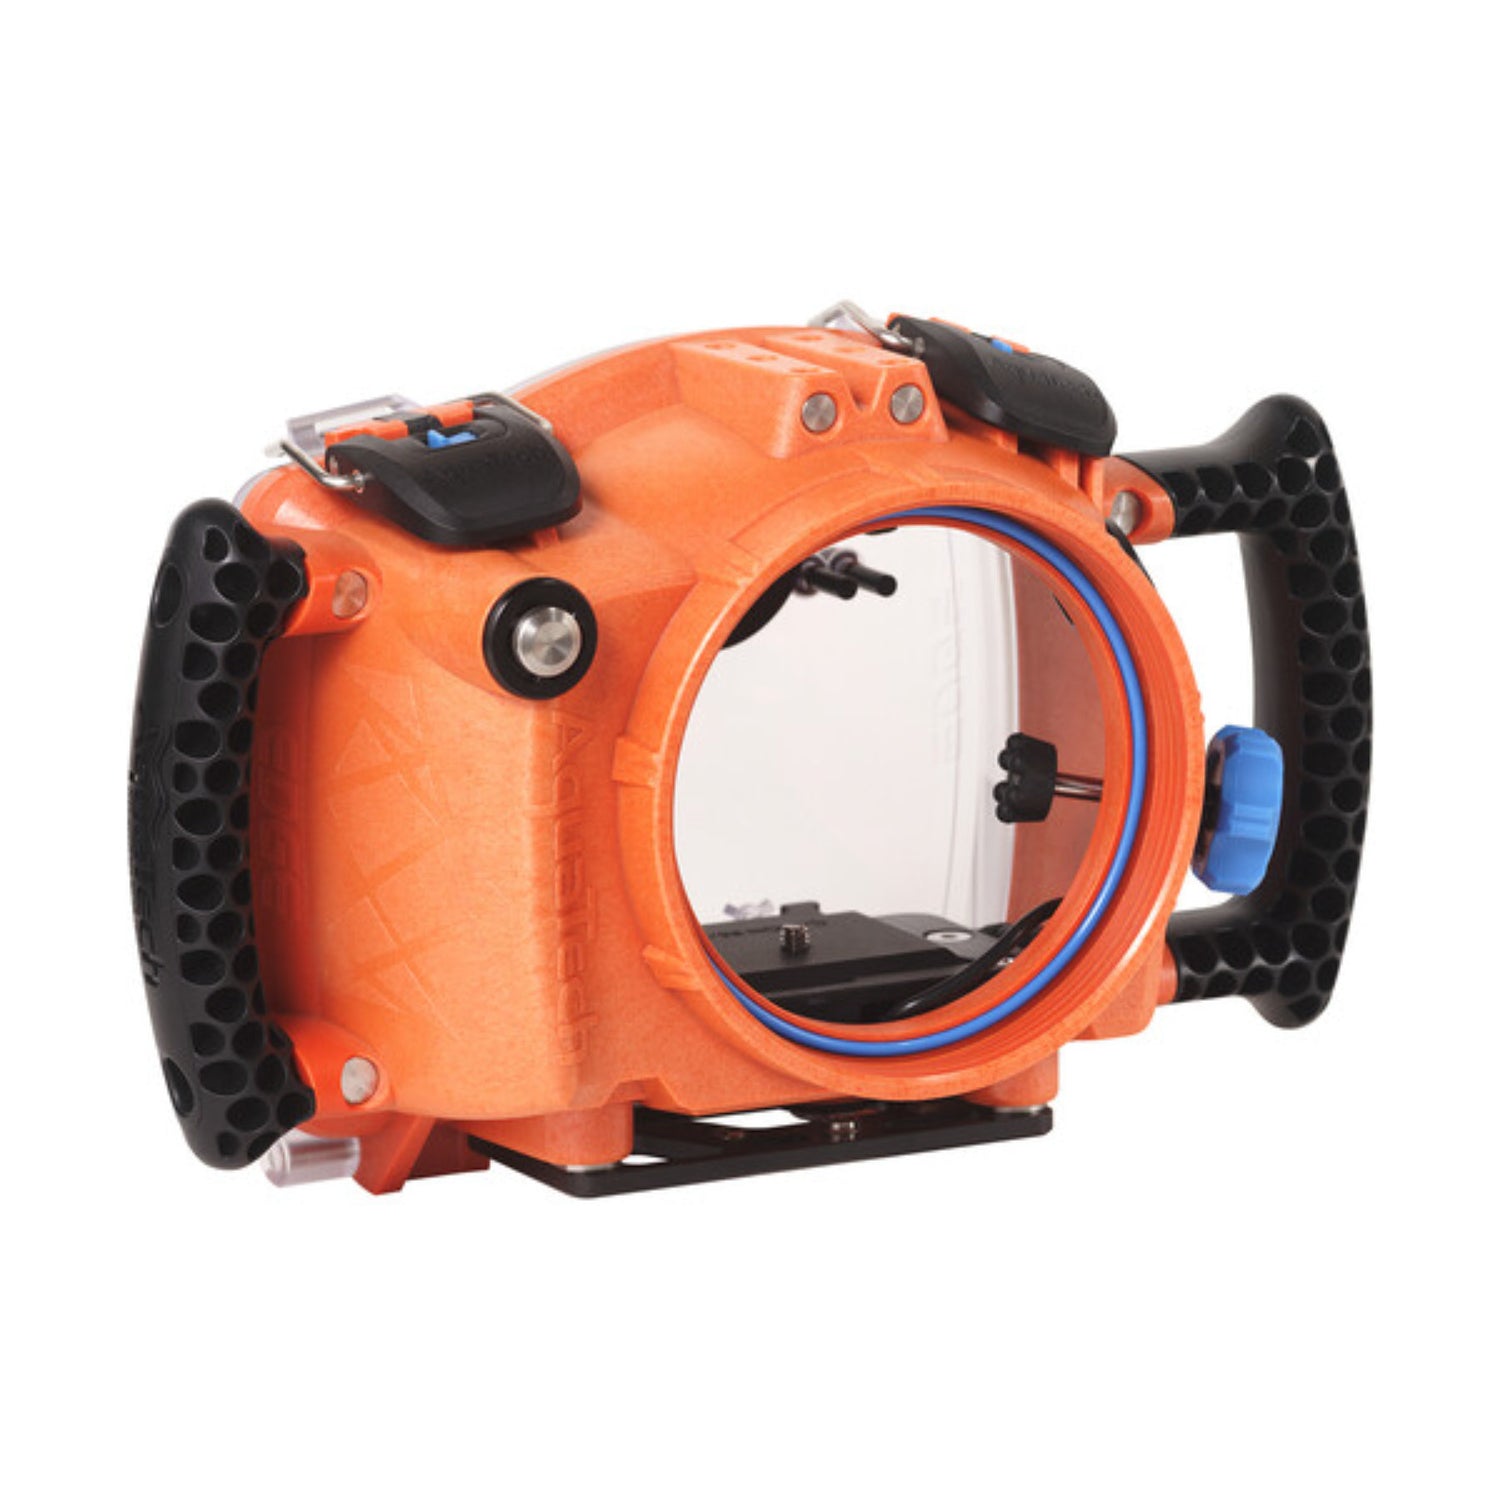 Hire Aquatech Underwater Housing for Canon R5/R6 at Topic Rentals